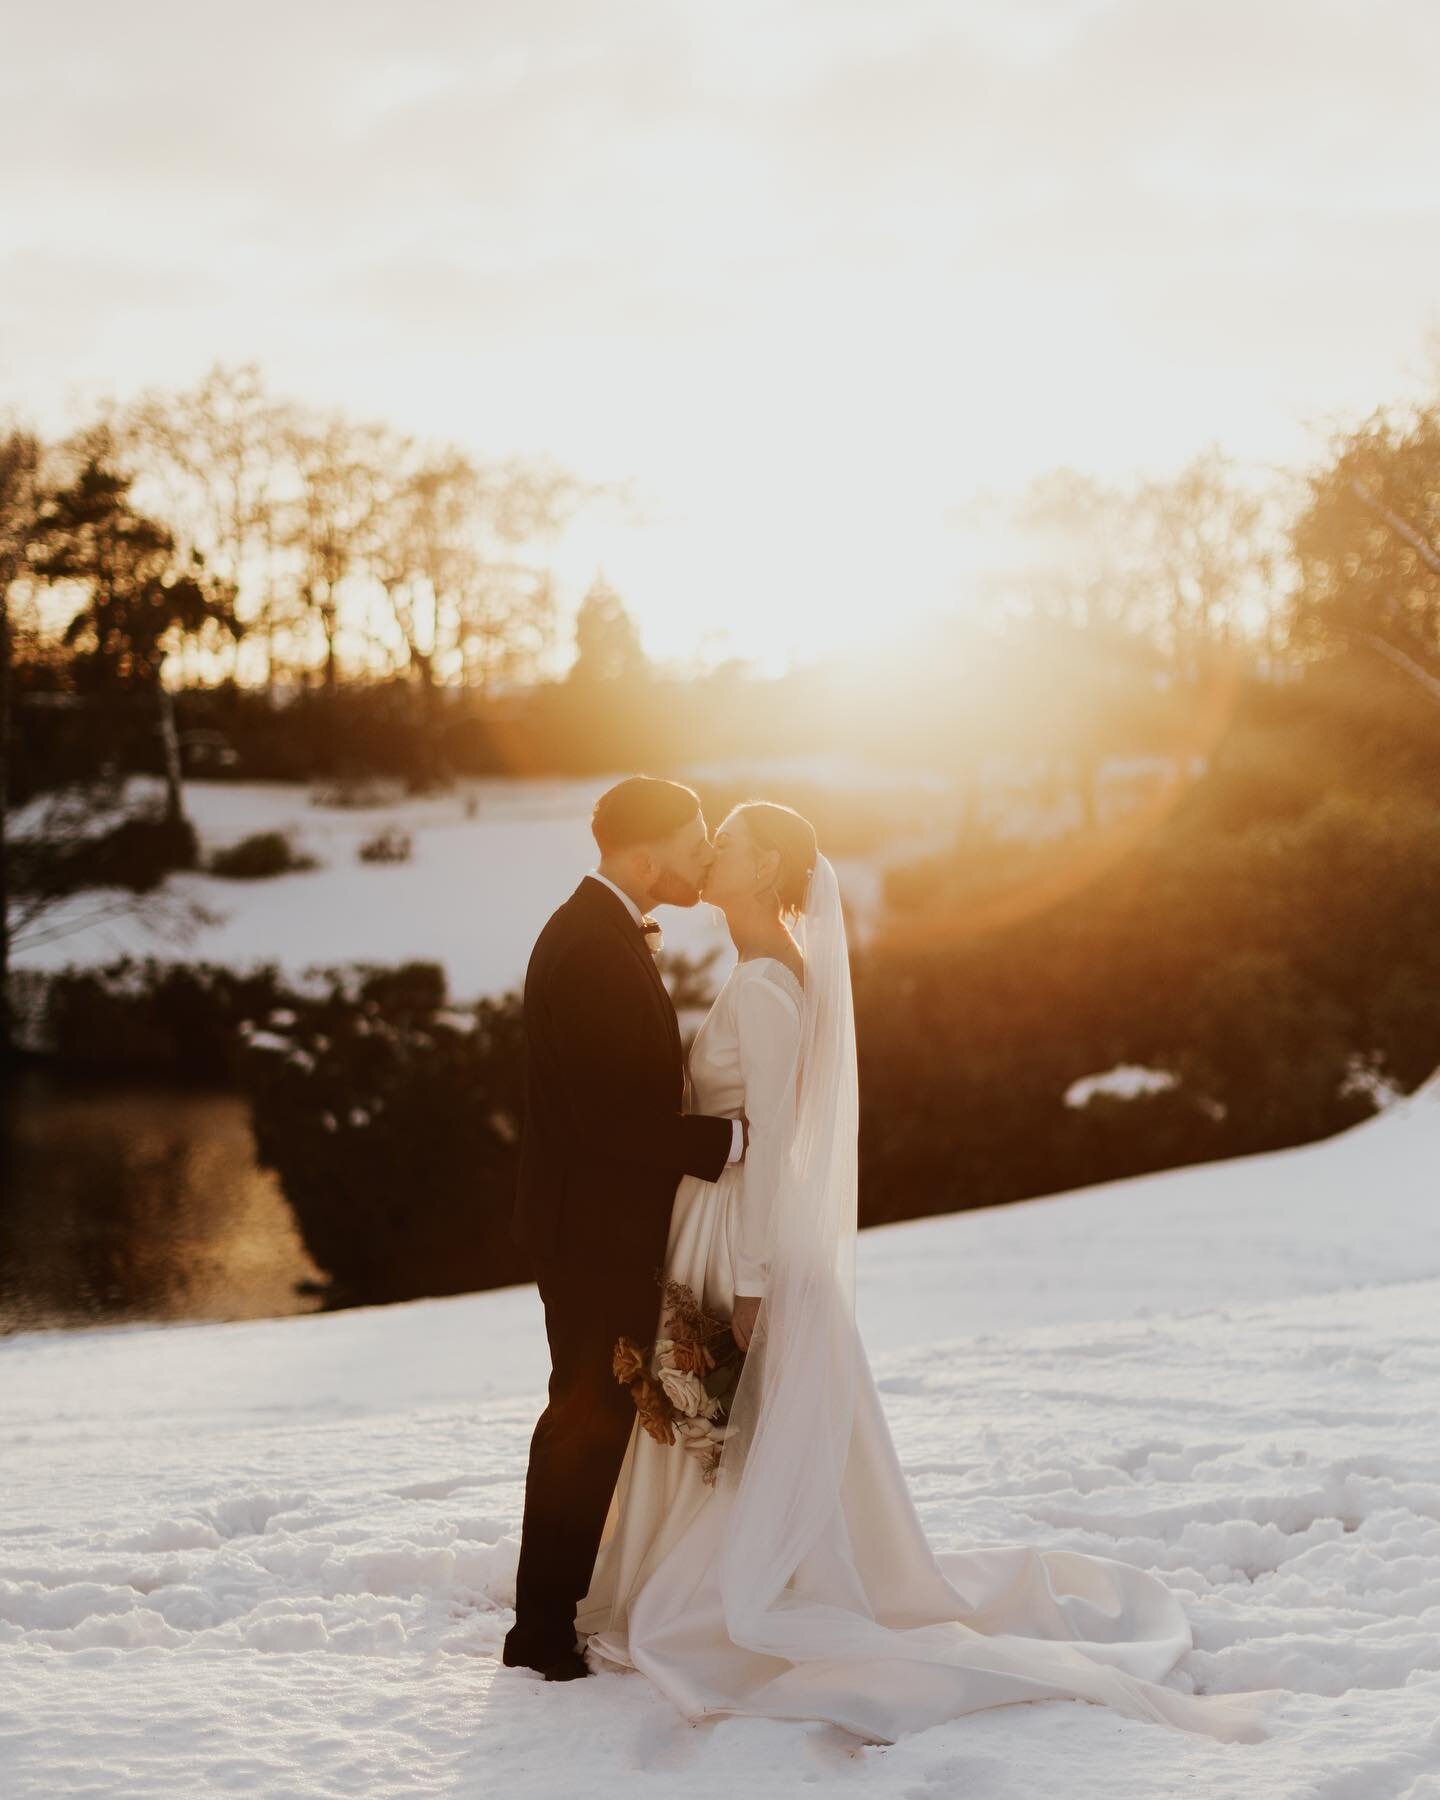 Just over a year ago these two got married on this beautiful snowy day! Happy one year! ✨